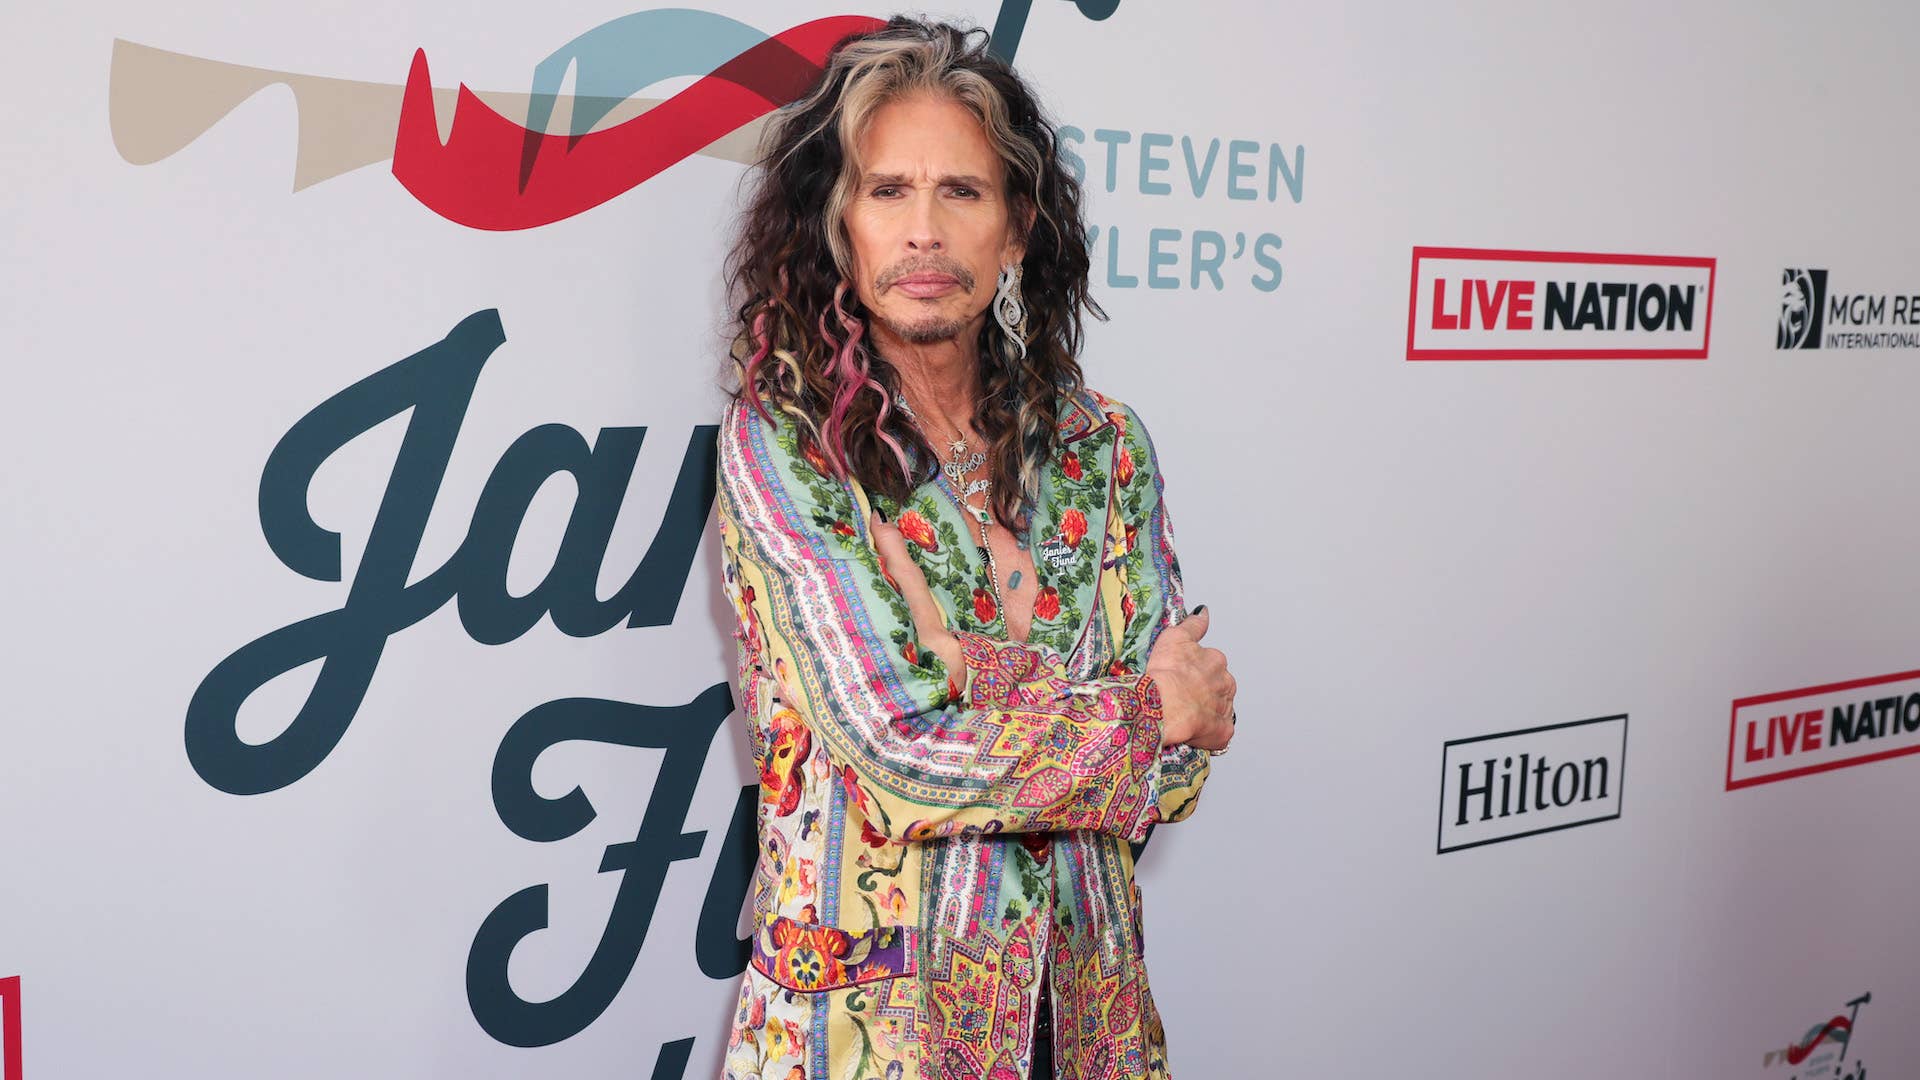 Steven Tyler photographed in Los Angeles